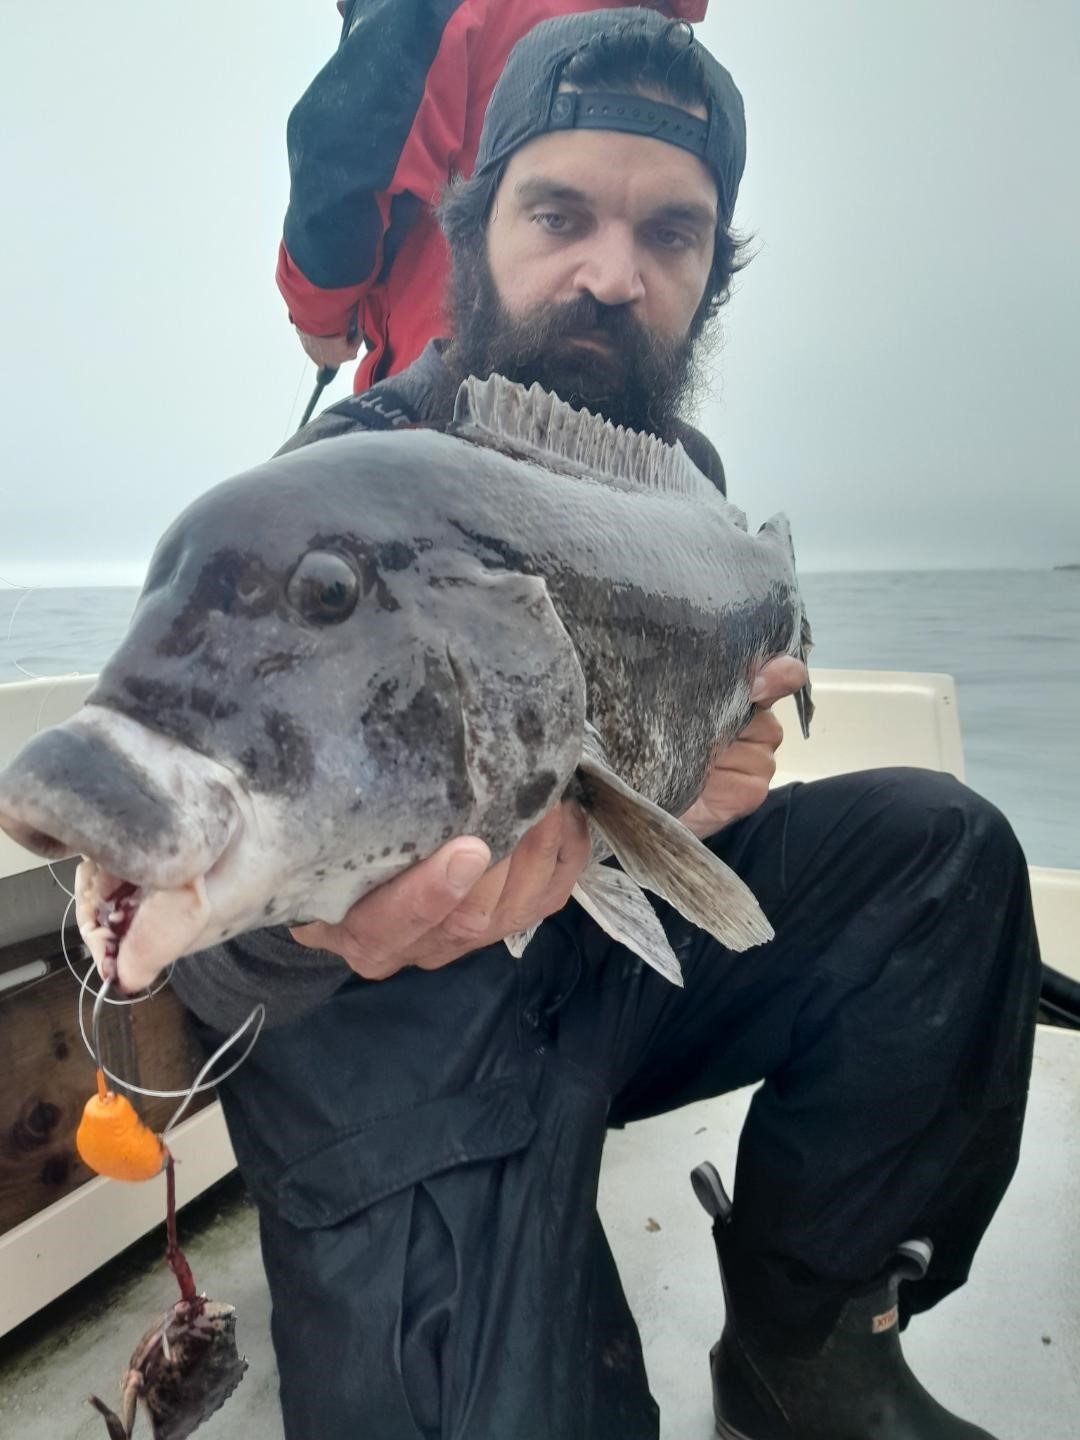 Jigs outperform any bait rig for Jeff Sullivan, shown here with at 13-pound tautog caught off Newport.